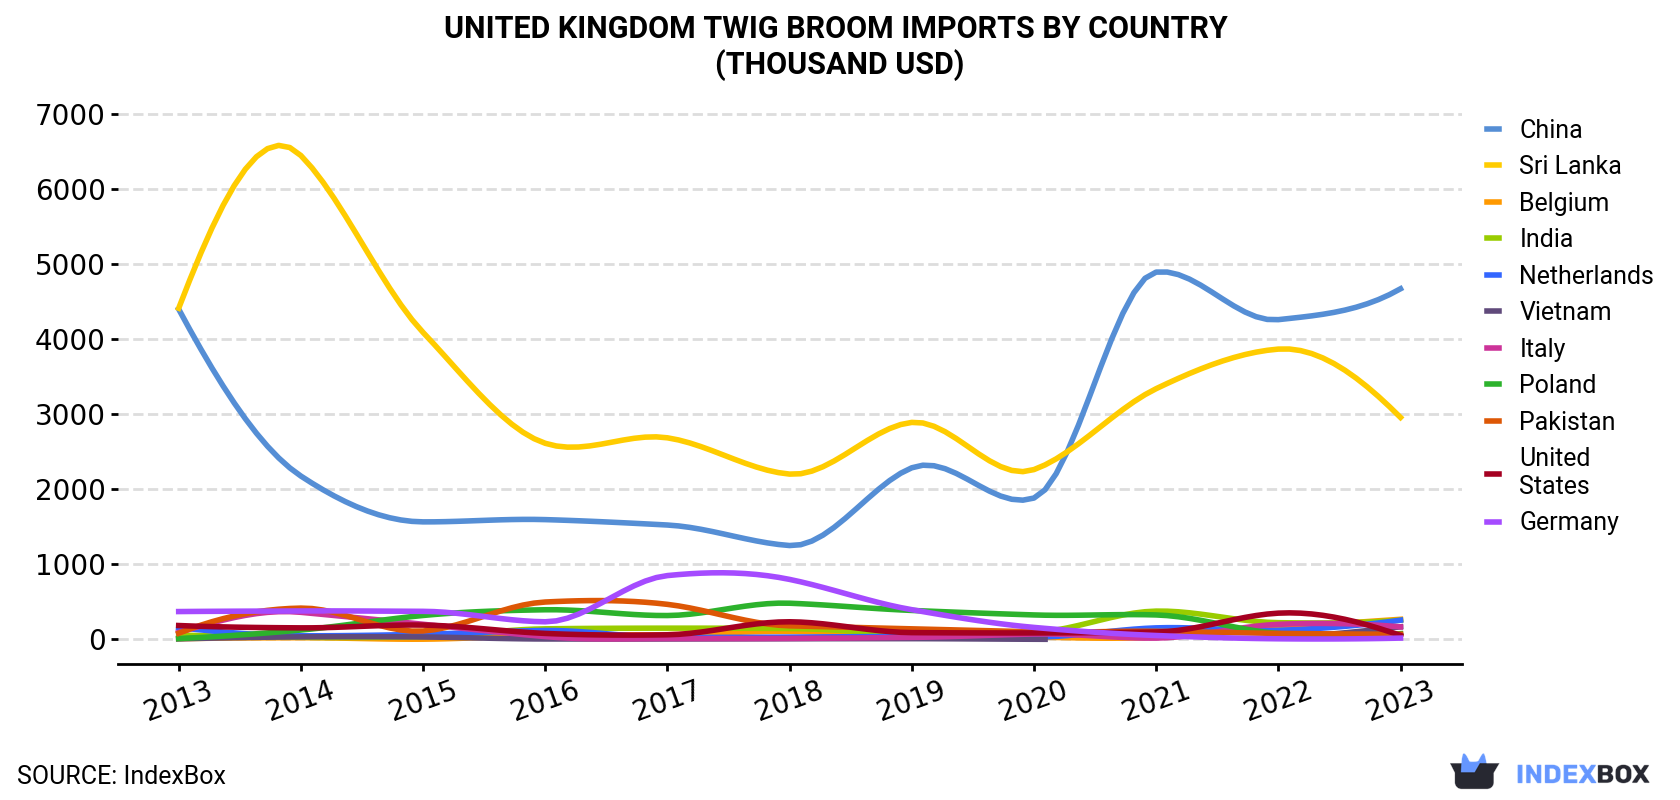 United Kingdom Twig Broom Imports By Country (Thousand USD)